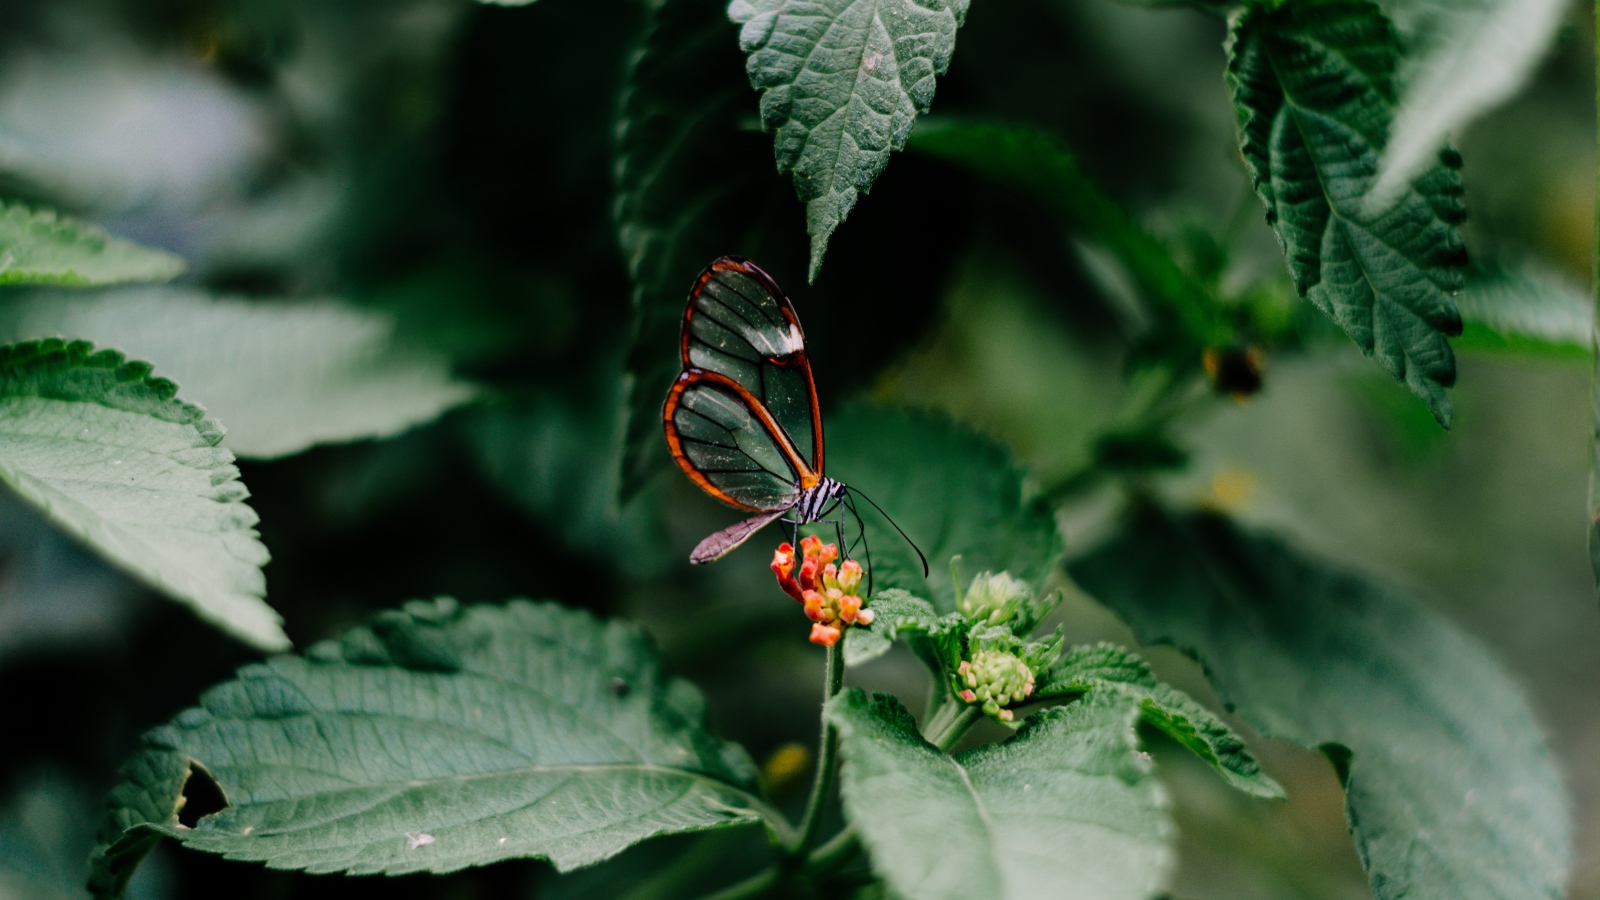 Small transparent butterfly sits on a flower in green leaves